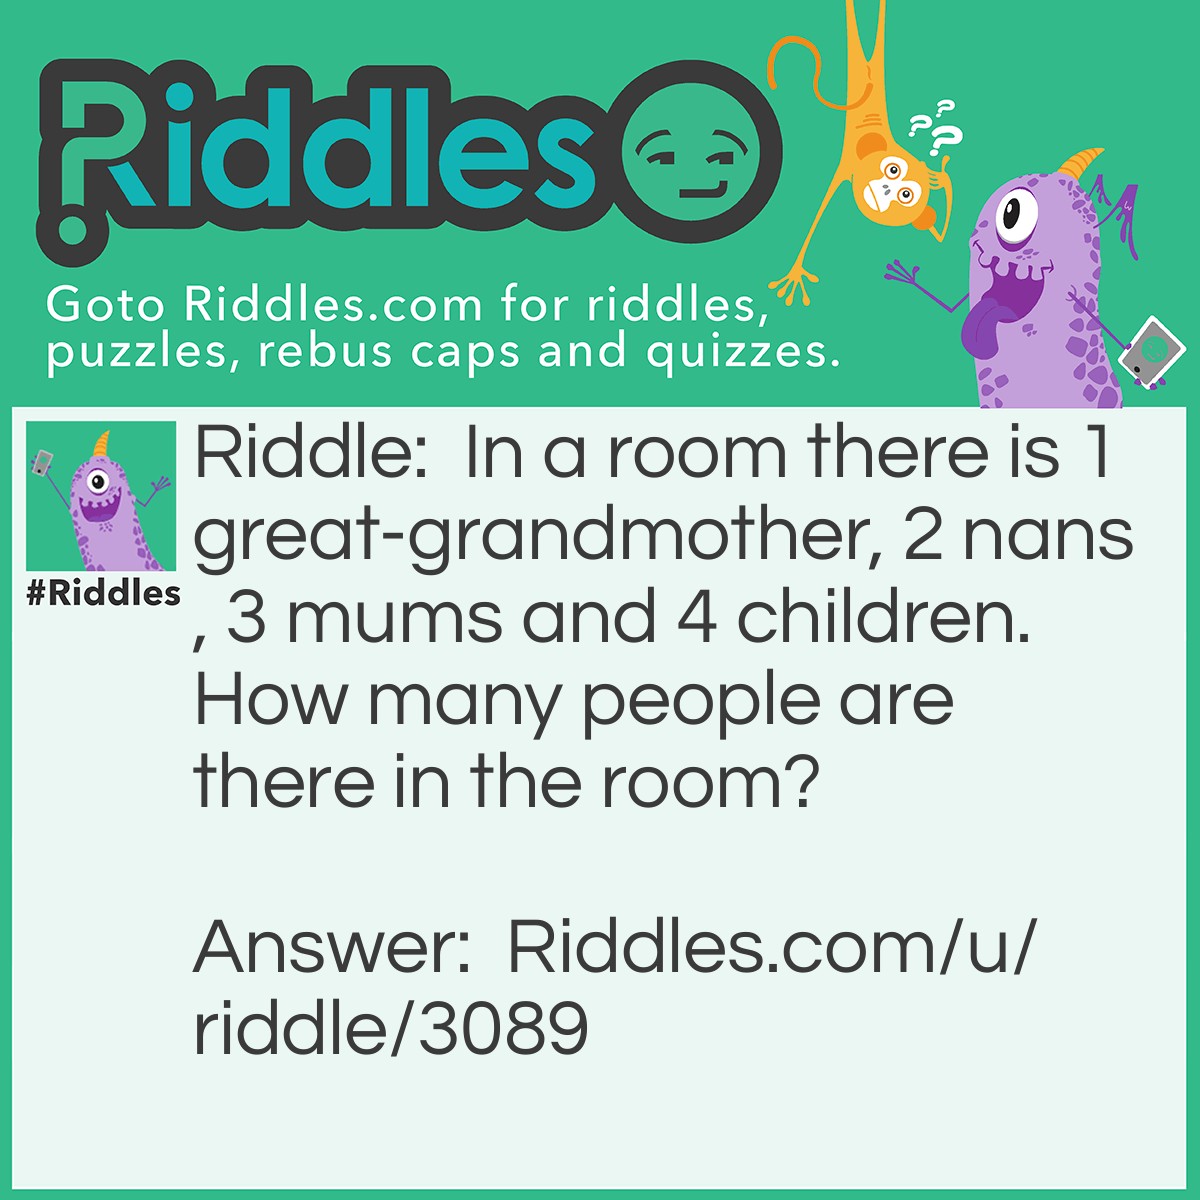 Riddle: In a room, there is 1 great-grandmother, 2 nans, 3 mums, and 4 children. How many people are there in the room? Answer: 4 because say in a room there was a great grandma , a nan , a mum and a child. You have one great grandma, two nans ( the great grandma to the mum and the nan to the child) , three mums (great grandma to the nan the nan to the mum and the mum to the child) and four children as the great grandma, the nan, the mum and the child are all someones child so are all children which makes there 4 people.